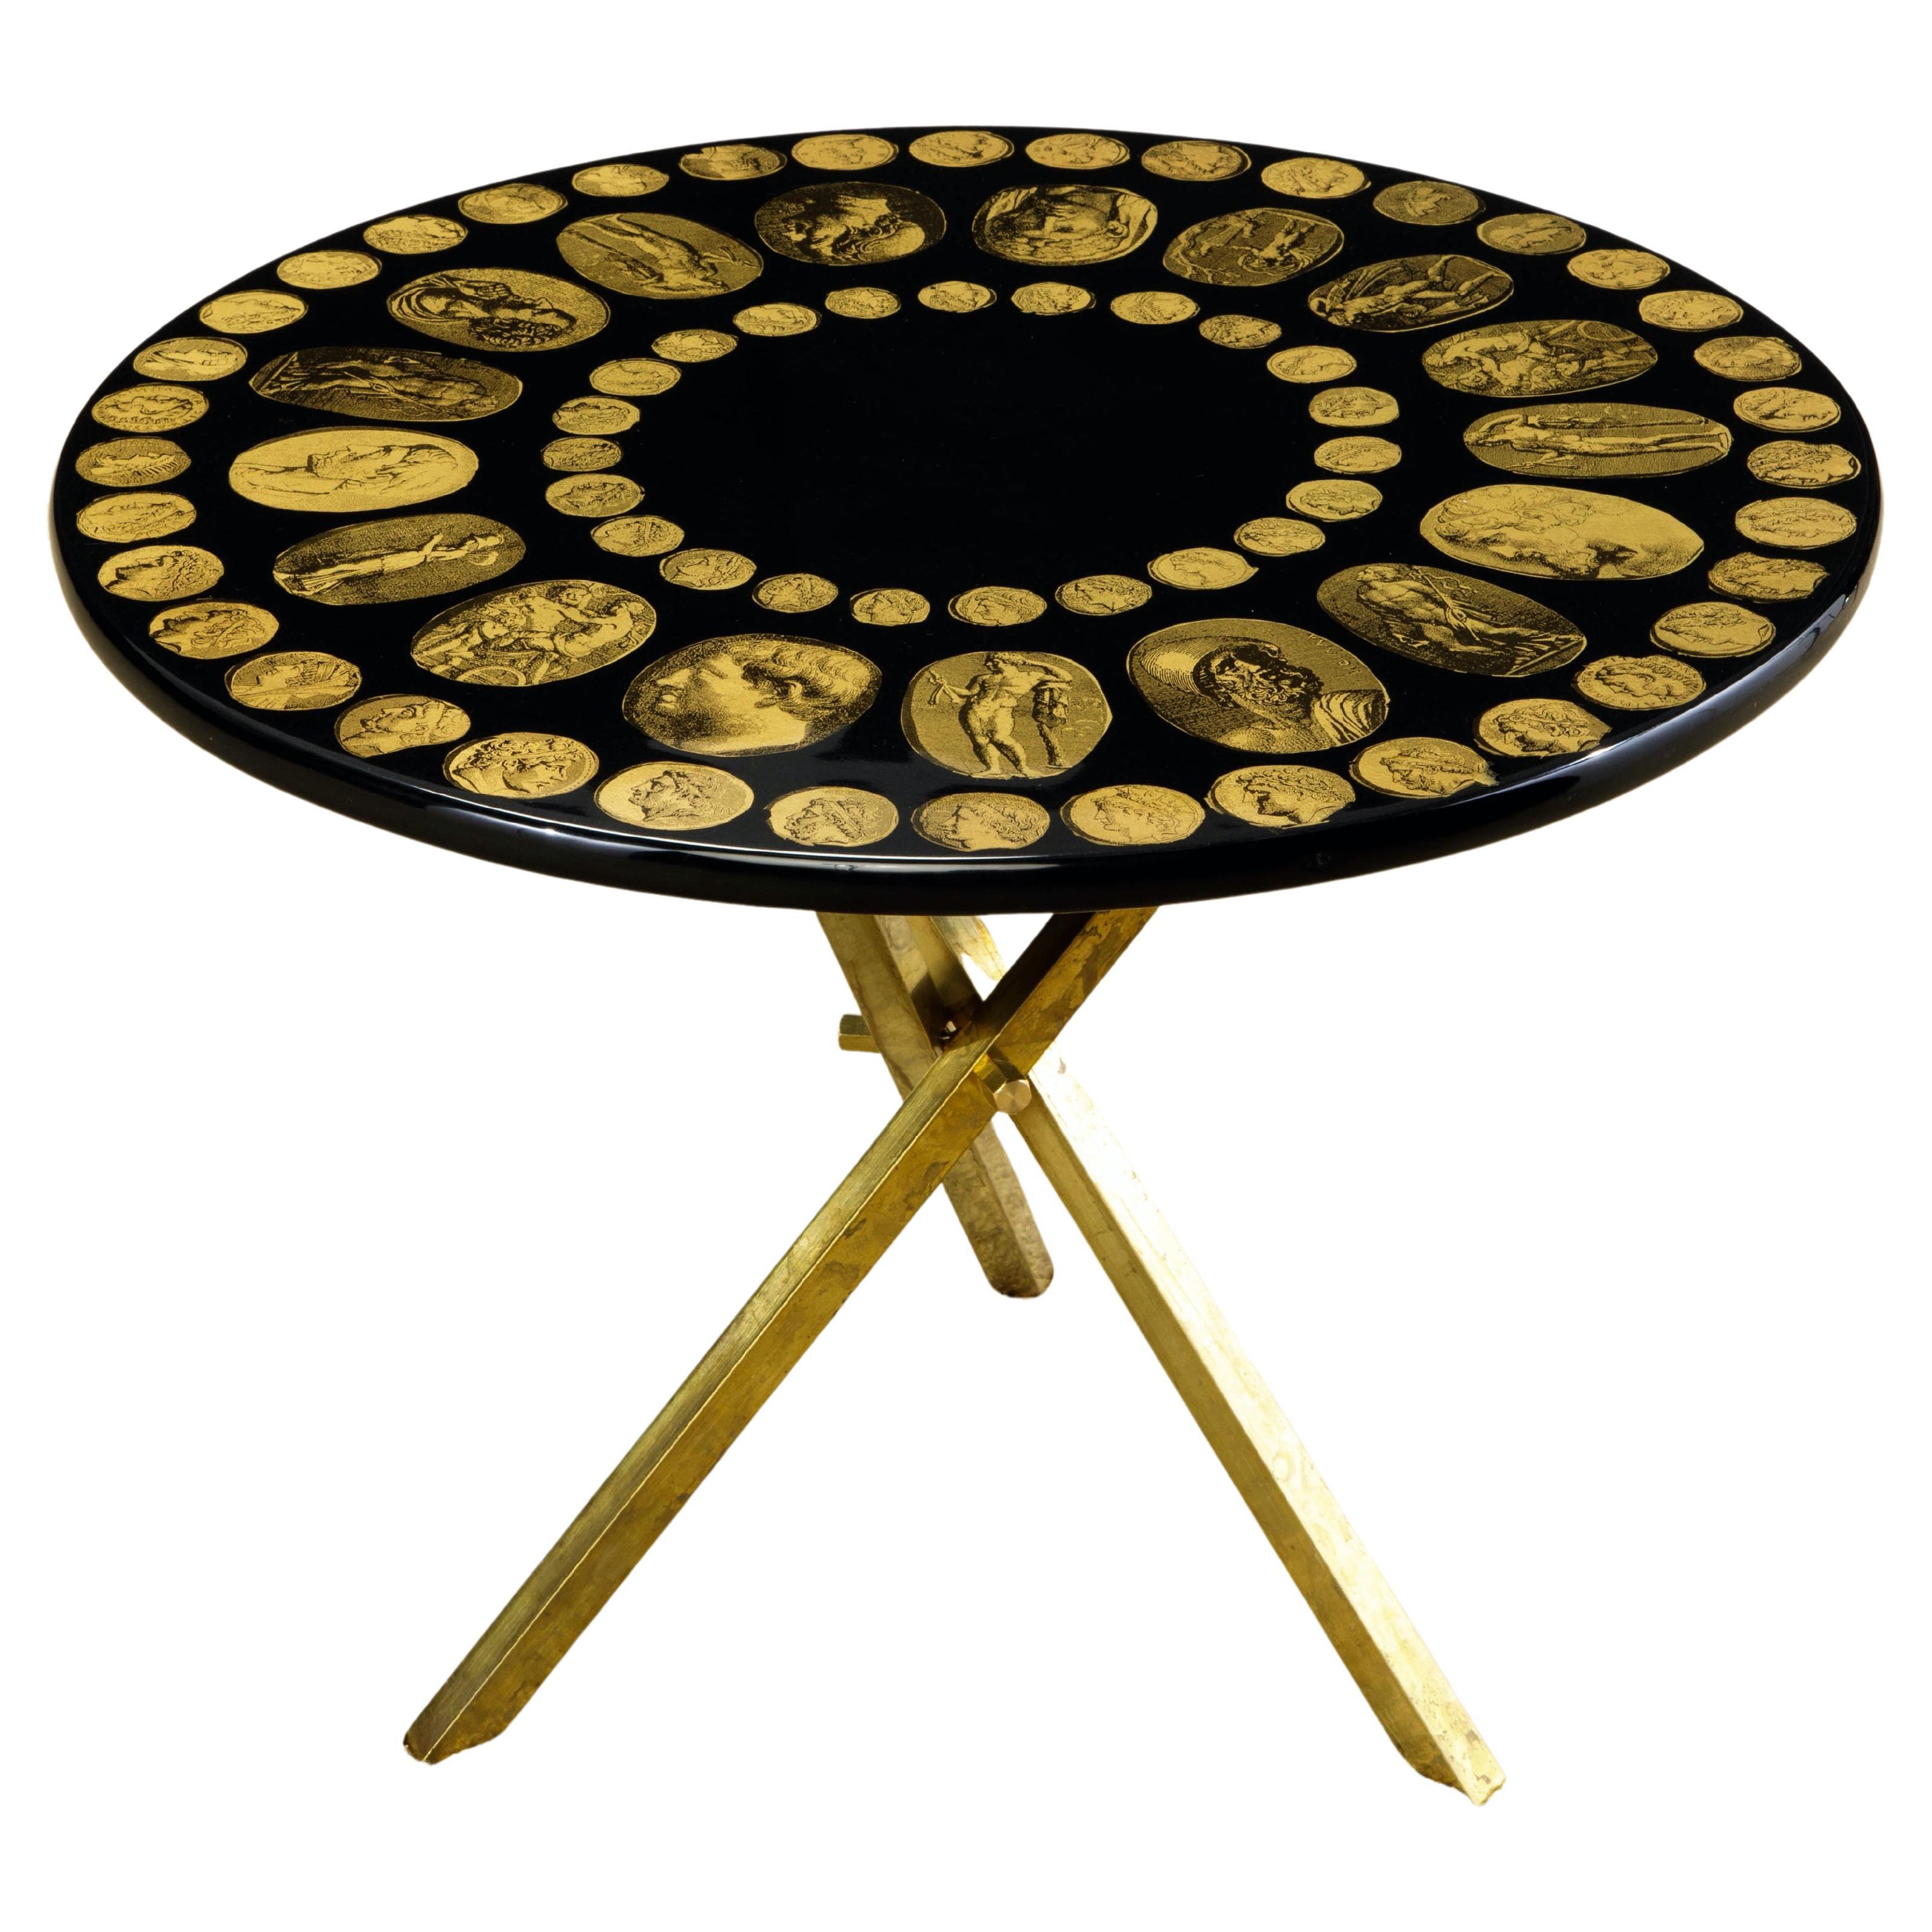 'Cammei' Lacquered Wood and Brass Side Table by Piero Fornasetti, Signed  For Sale